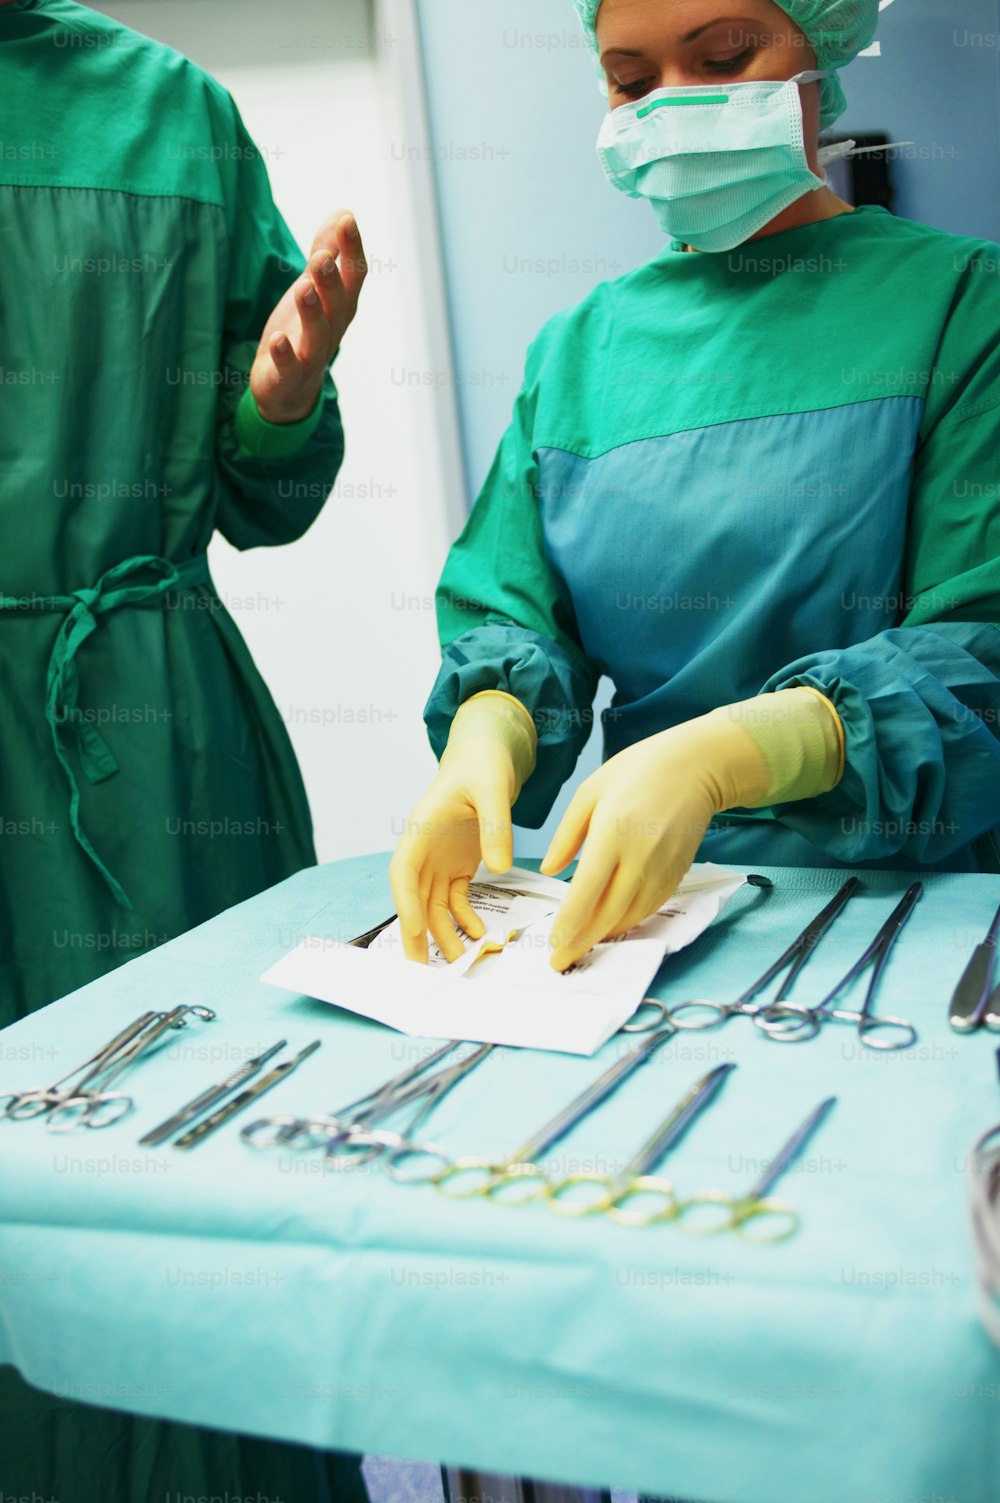 two surgeons in green scrubs and surgical equipment